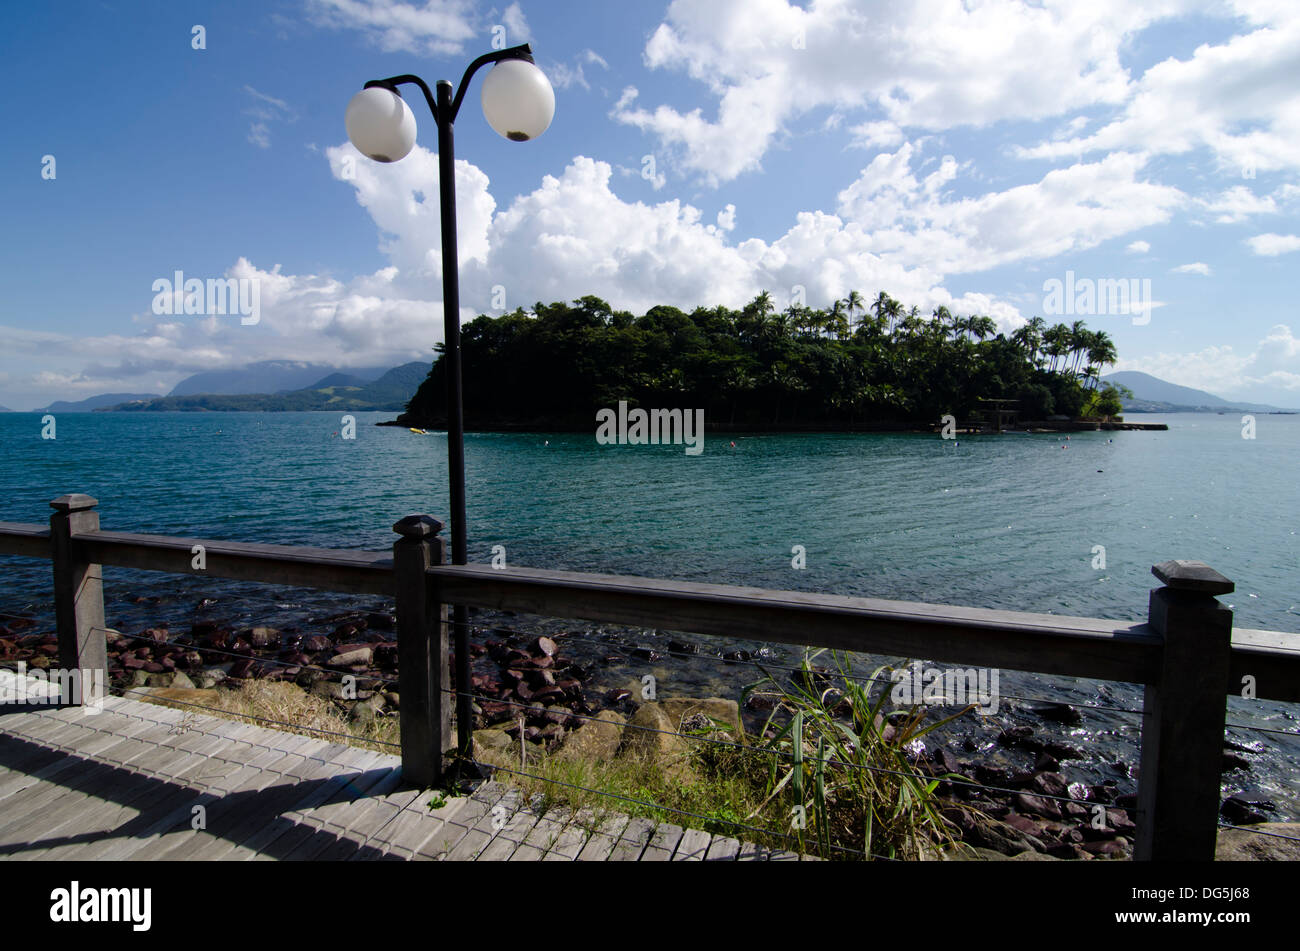 Ilha das Cabras (Goats Island) at Ilhabela, view from the street.  Sao Paulo state shore, Brazil Stock Photo